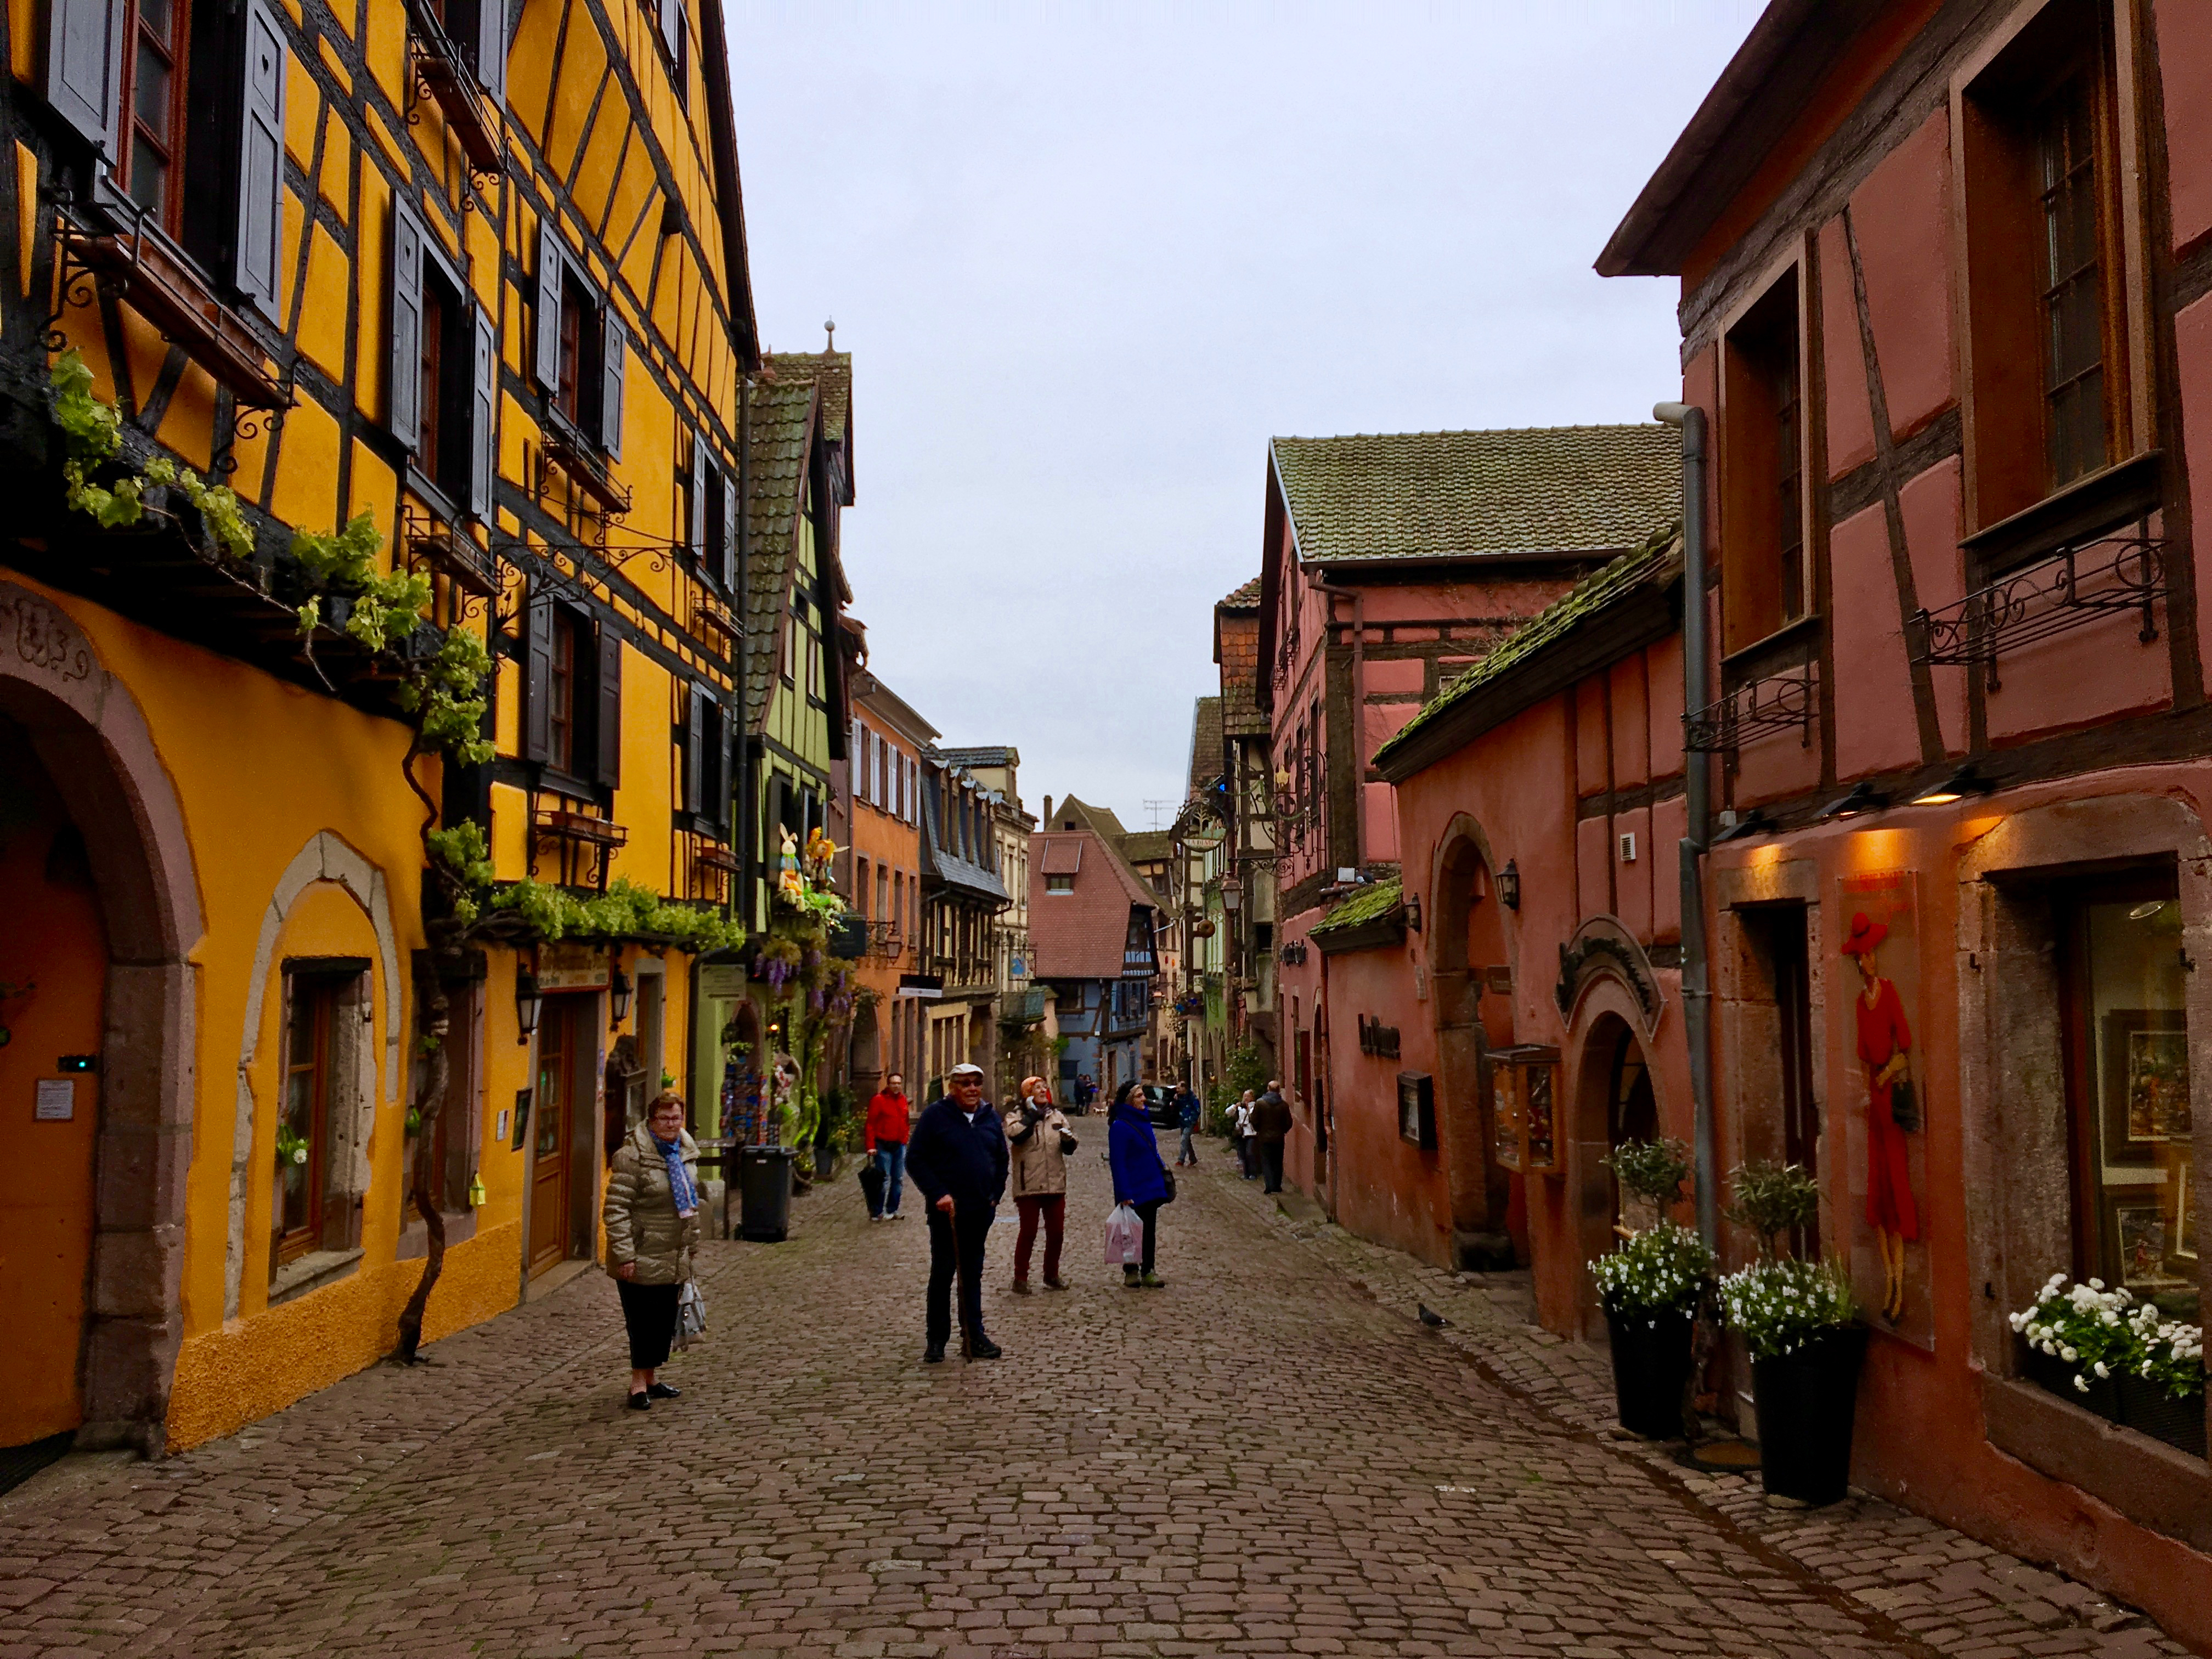 An Afternoon in Alsace